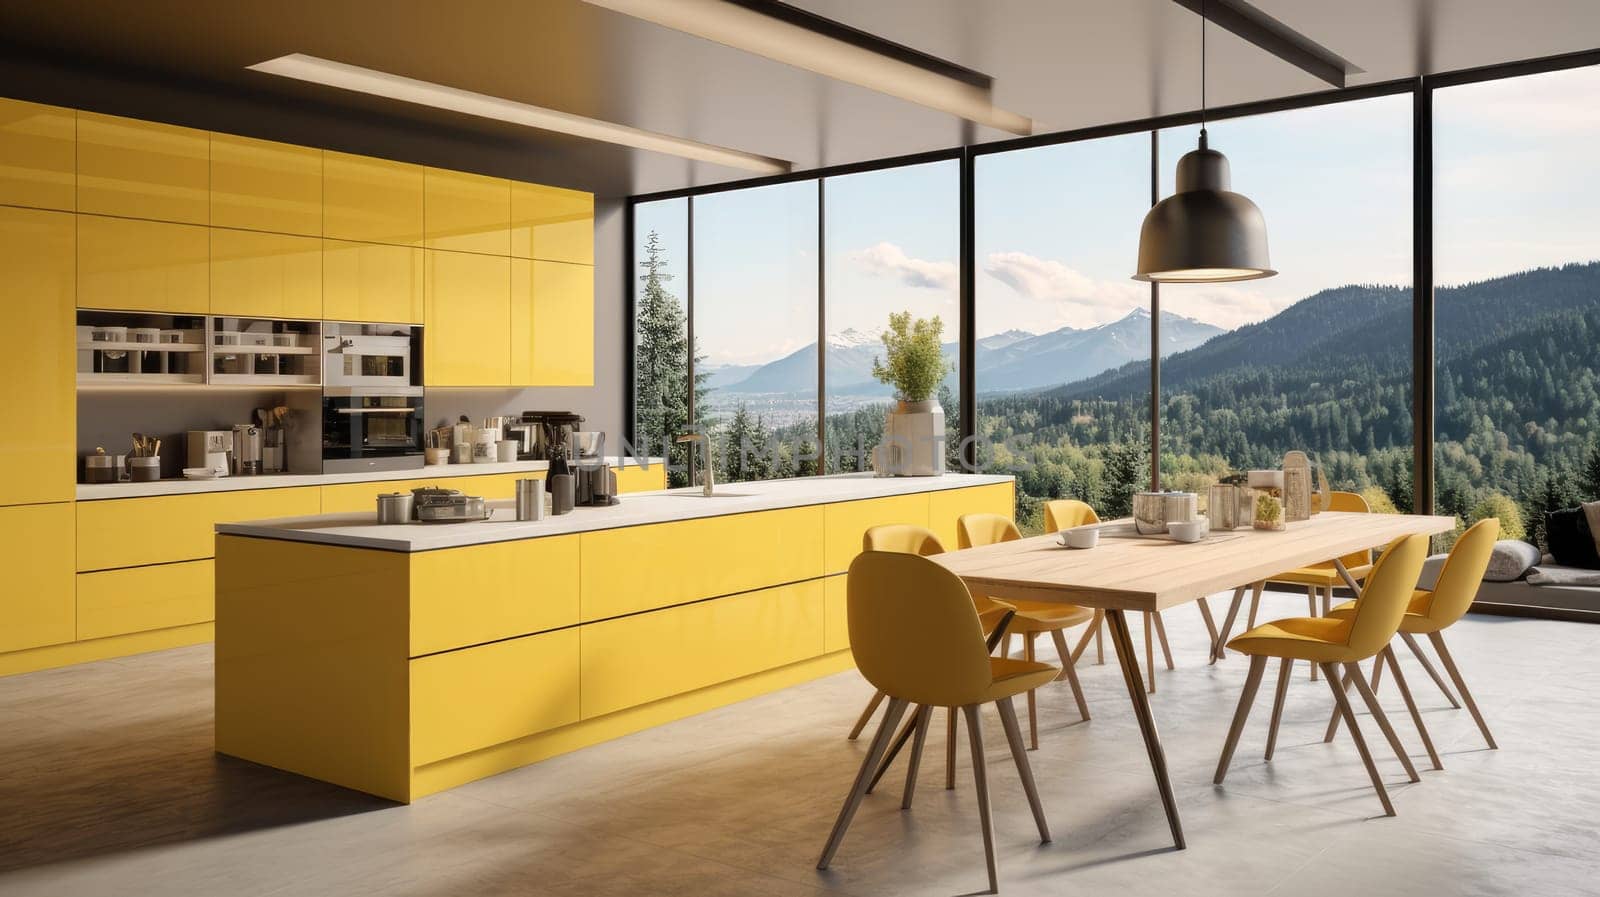 Modern home interior. Modern kitchen design in a yellow light interior. Program for designing modern apartments. Preparing food, food and drinks in the comfort of your home kitchen. copy space, studio and real estate advertising, premises rental